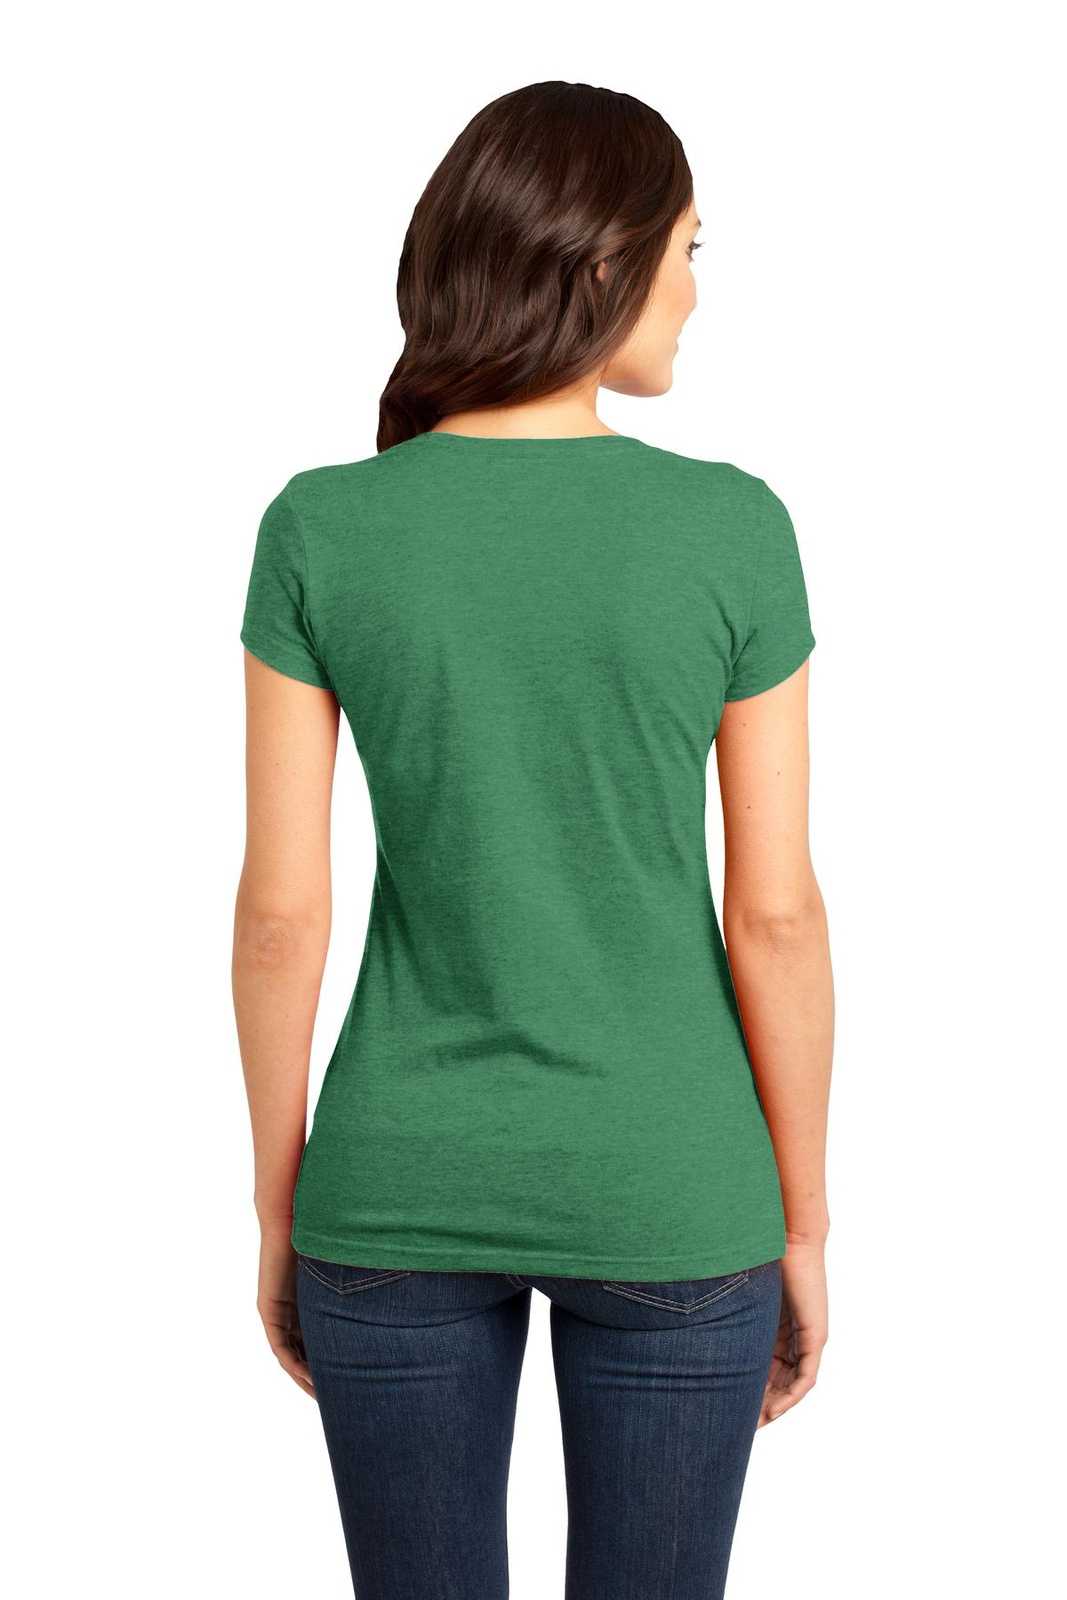 District DT6001 Women's Fitted Very Important Tee - Heathered Kelly Green - HIT a Double - 1